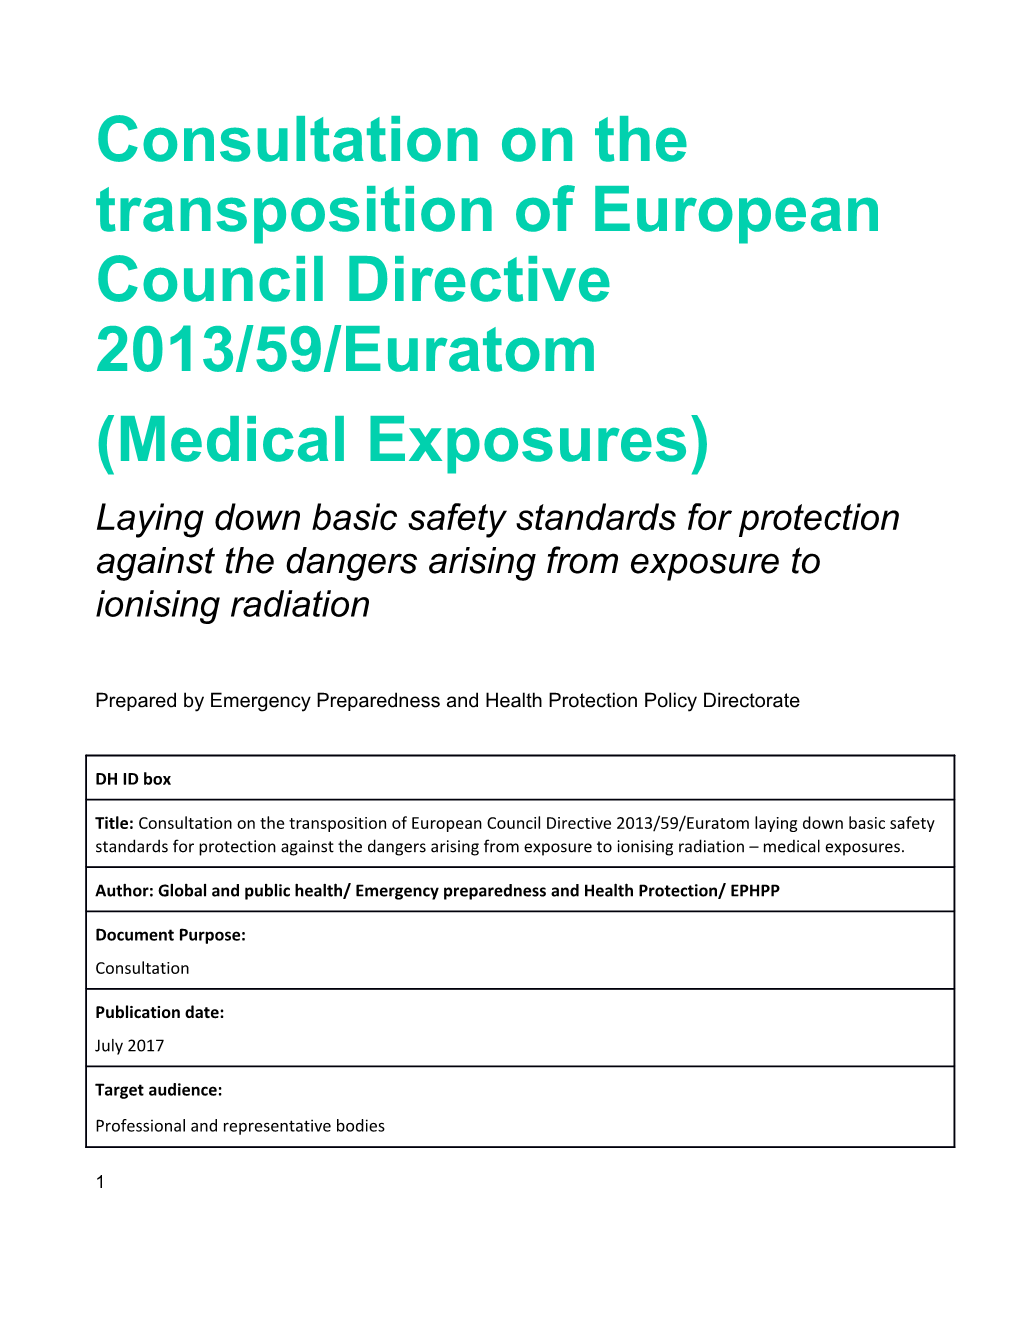 Consultation on the Transposition of European Council Directive 2013/59/Euratom